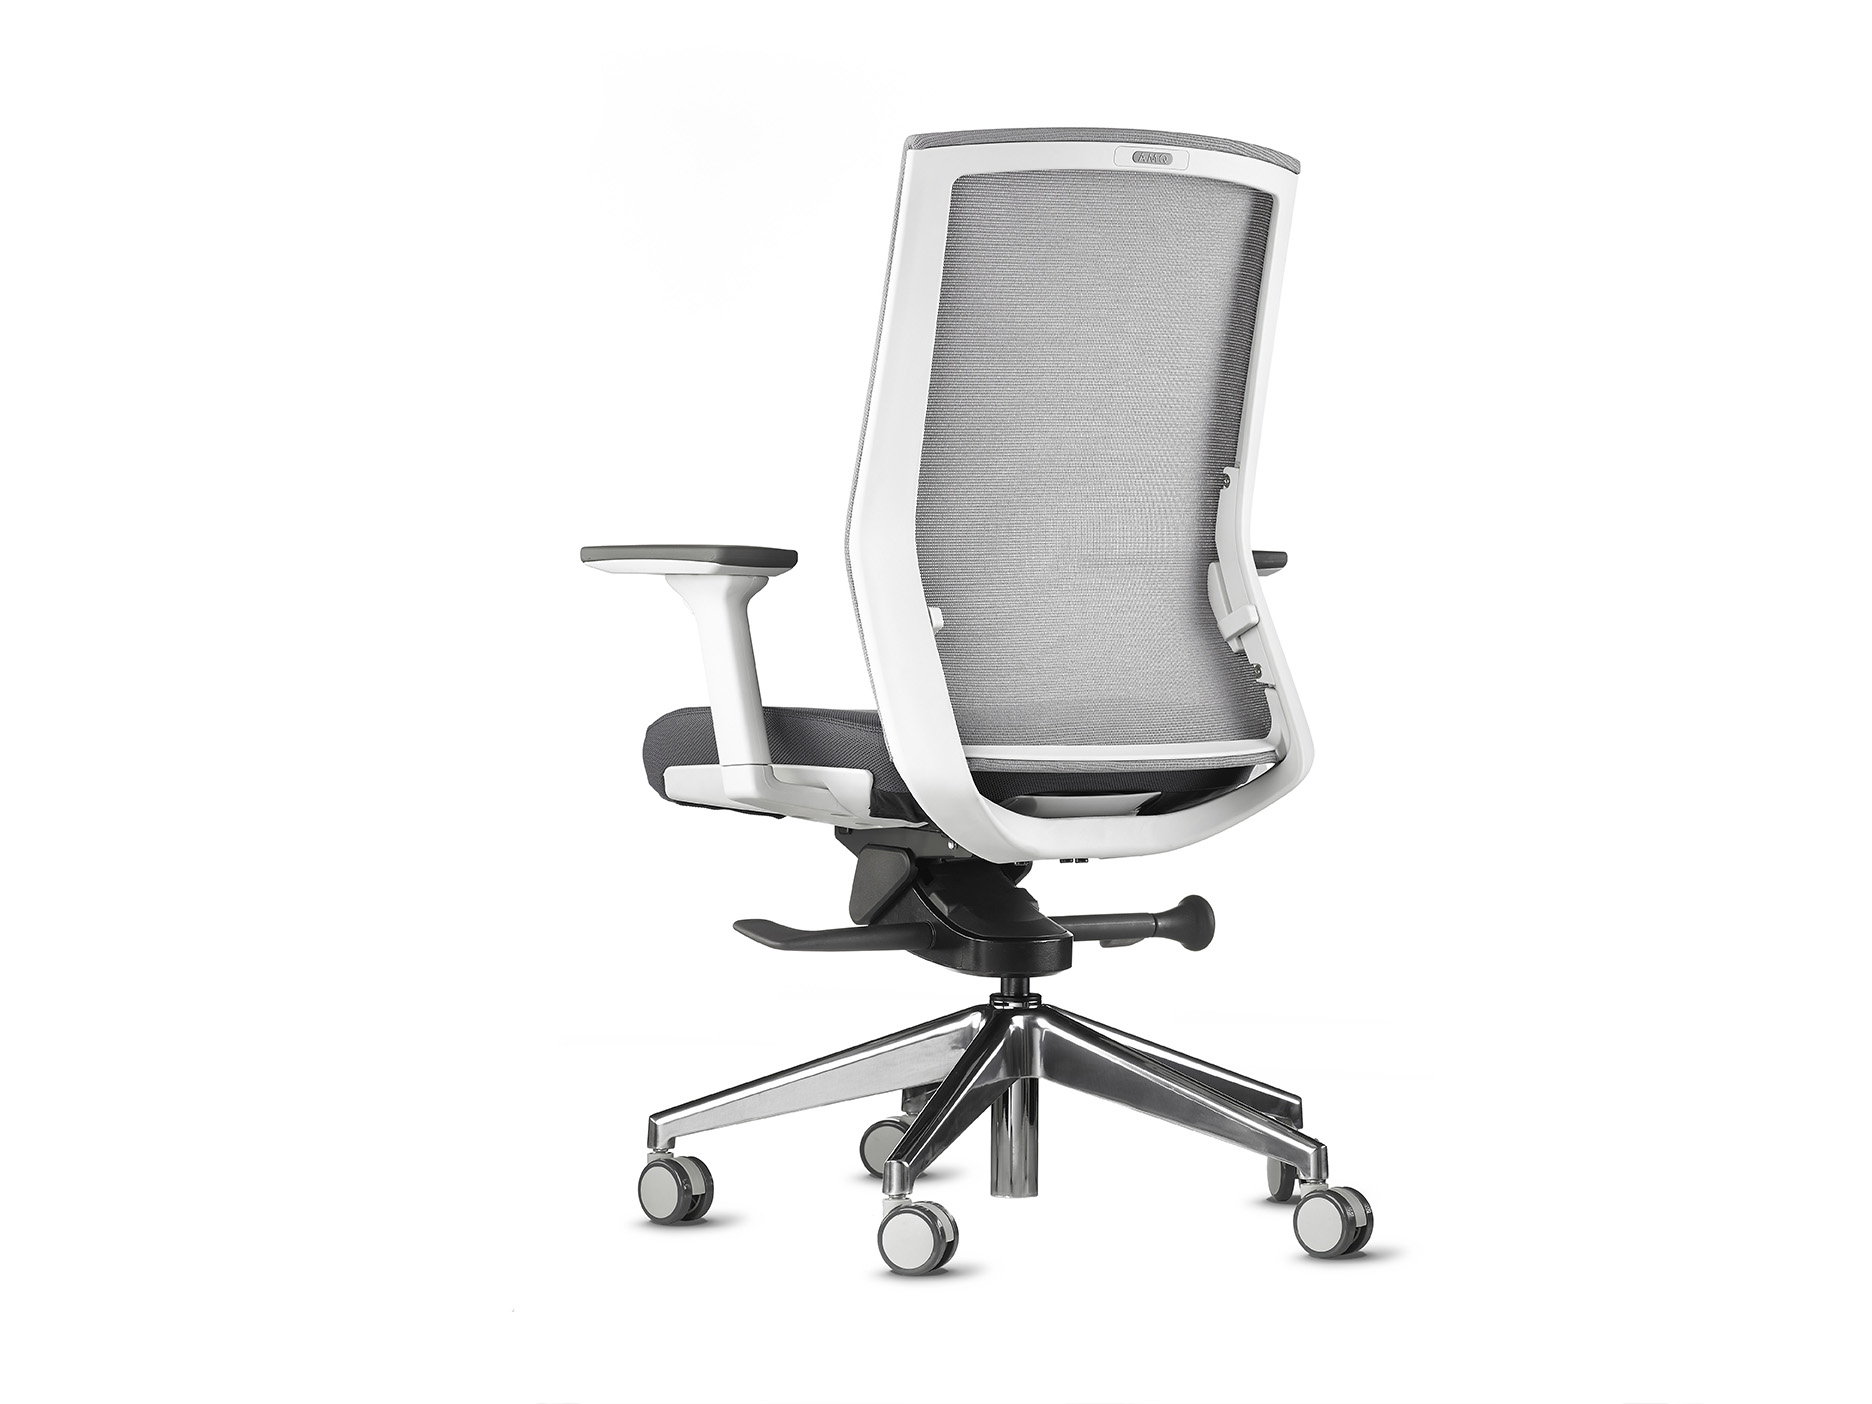 AMQ Zilo Task Chair by AMQ - Steelcase